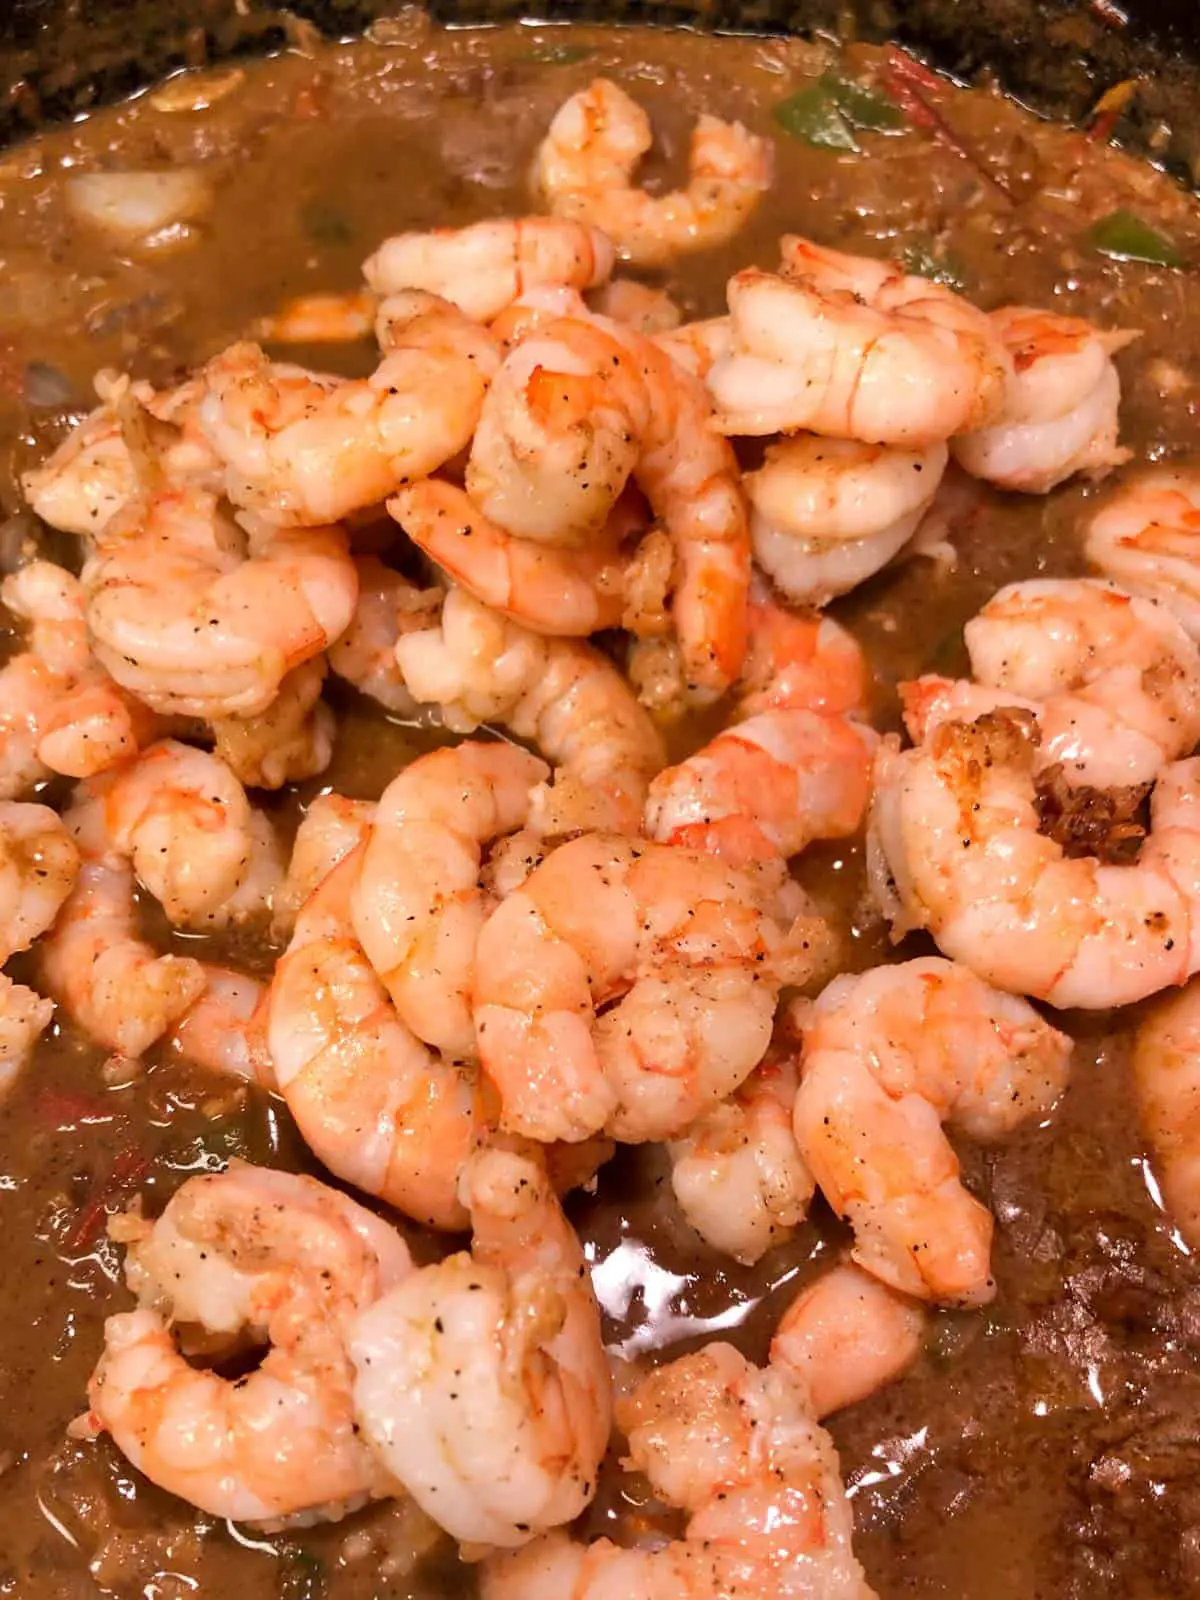 Cooked shrimp added to a dark curry sauce in a cast iron pan.